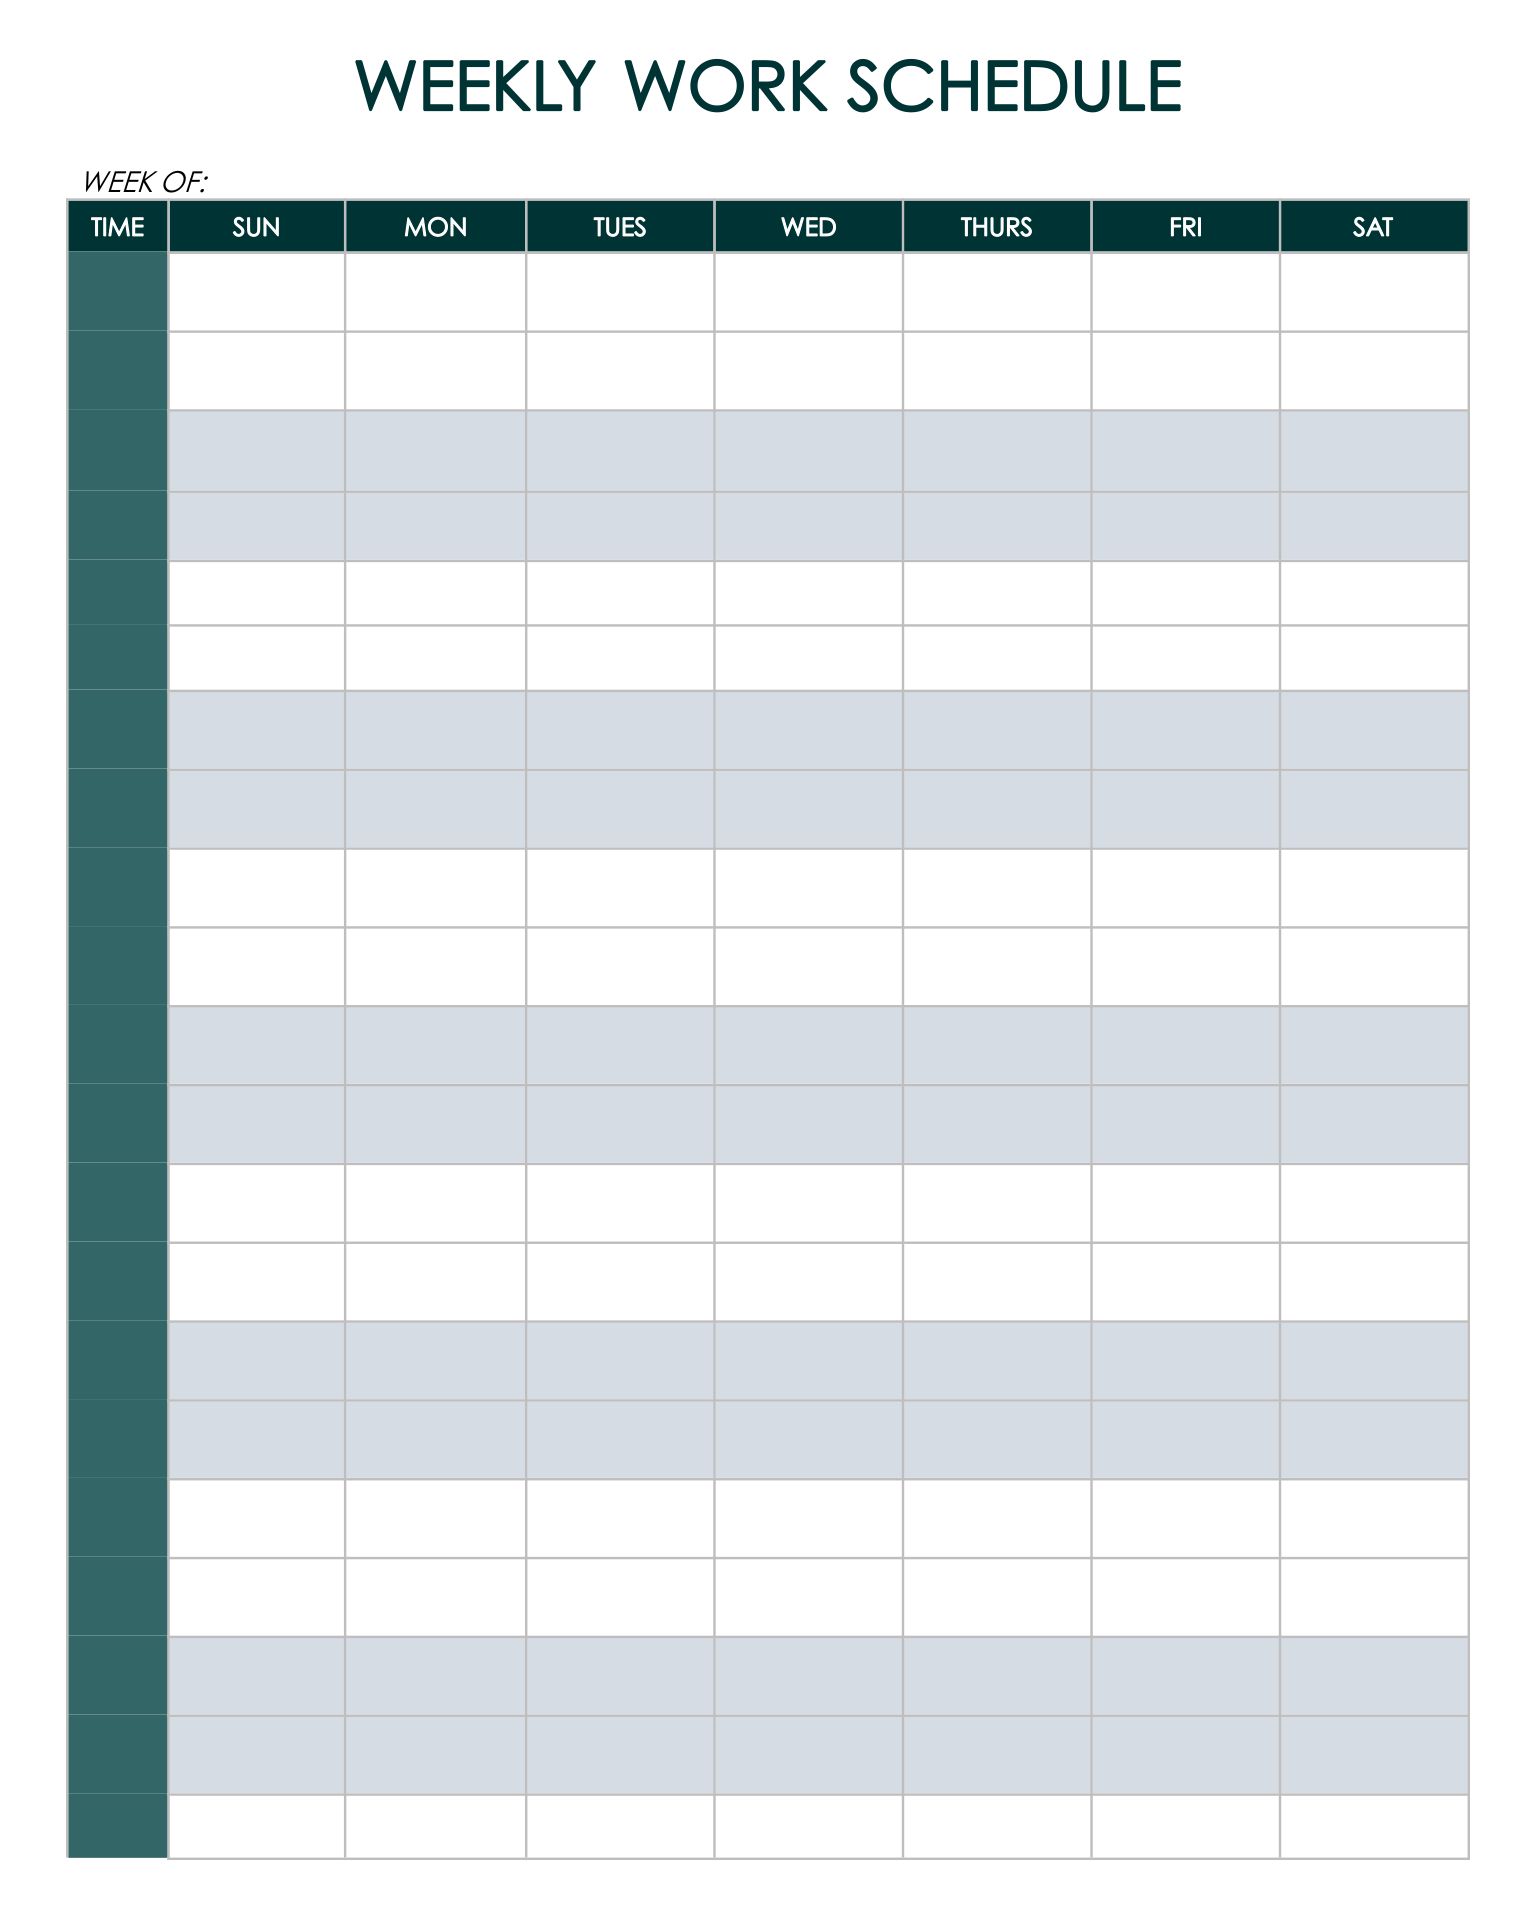 Staffing Schedule Template from www.printablee.com